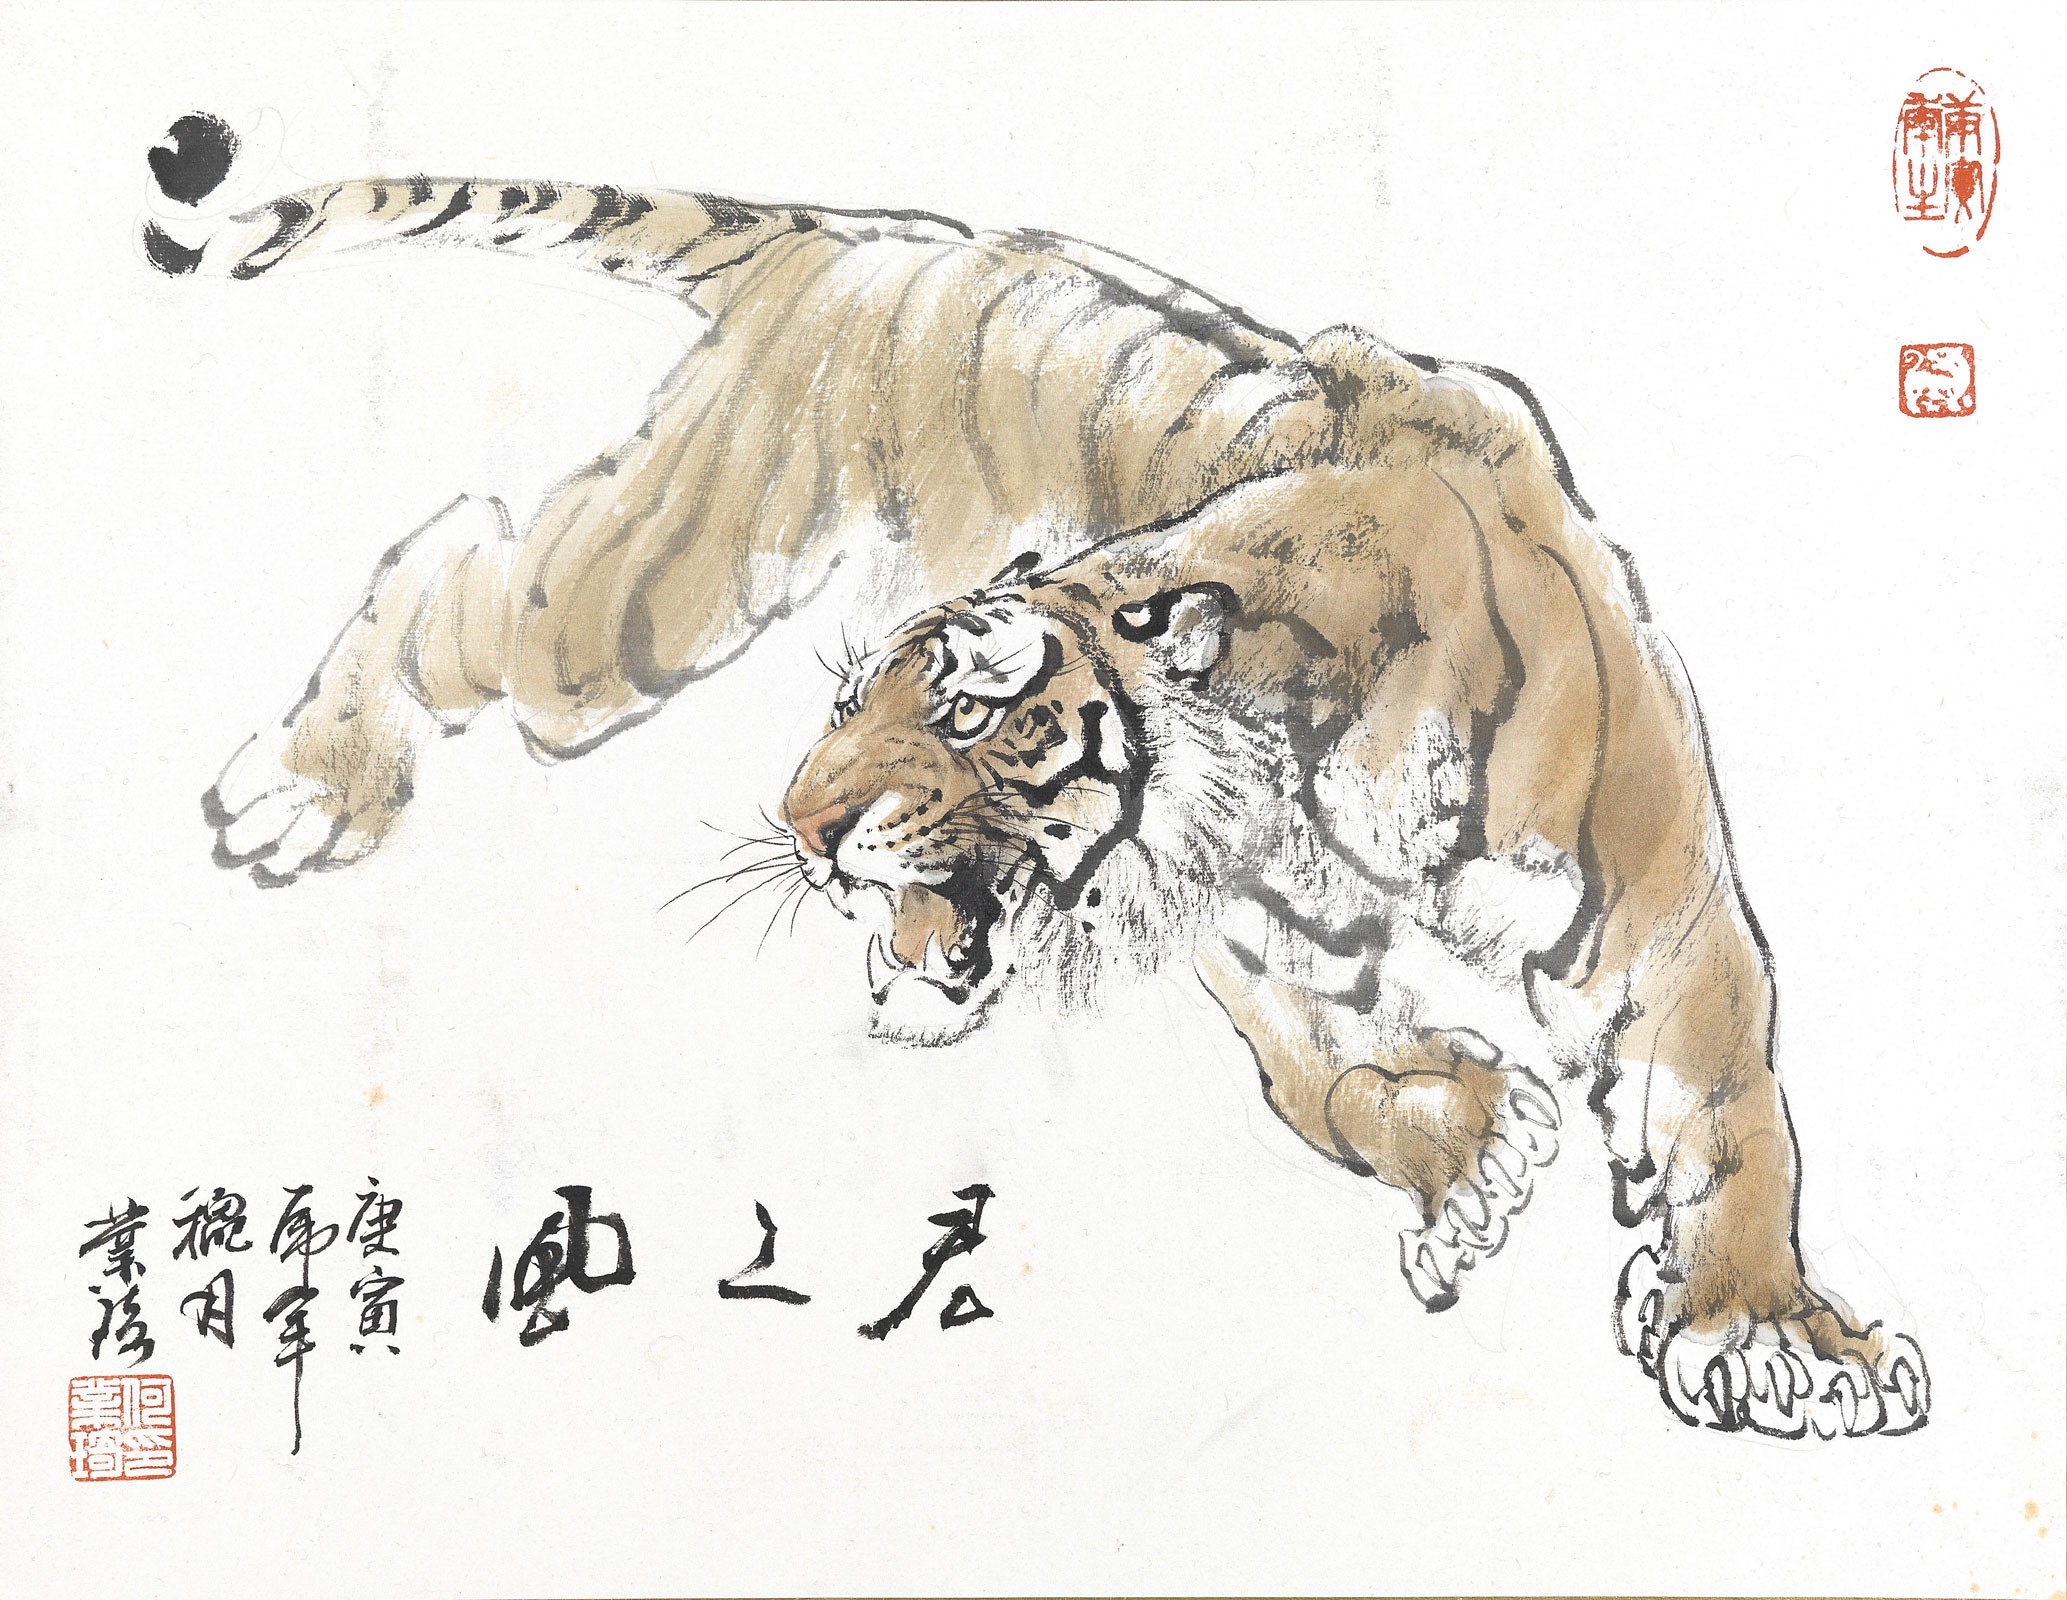 Lord of the Wind, Asian Tiger, c.2010, Ink and Watercolor on Paper